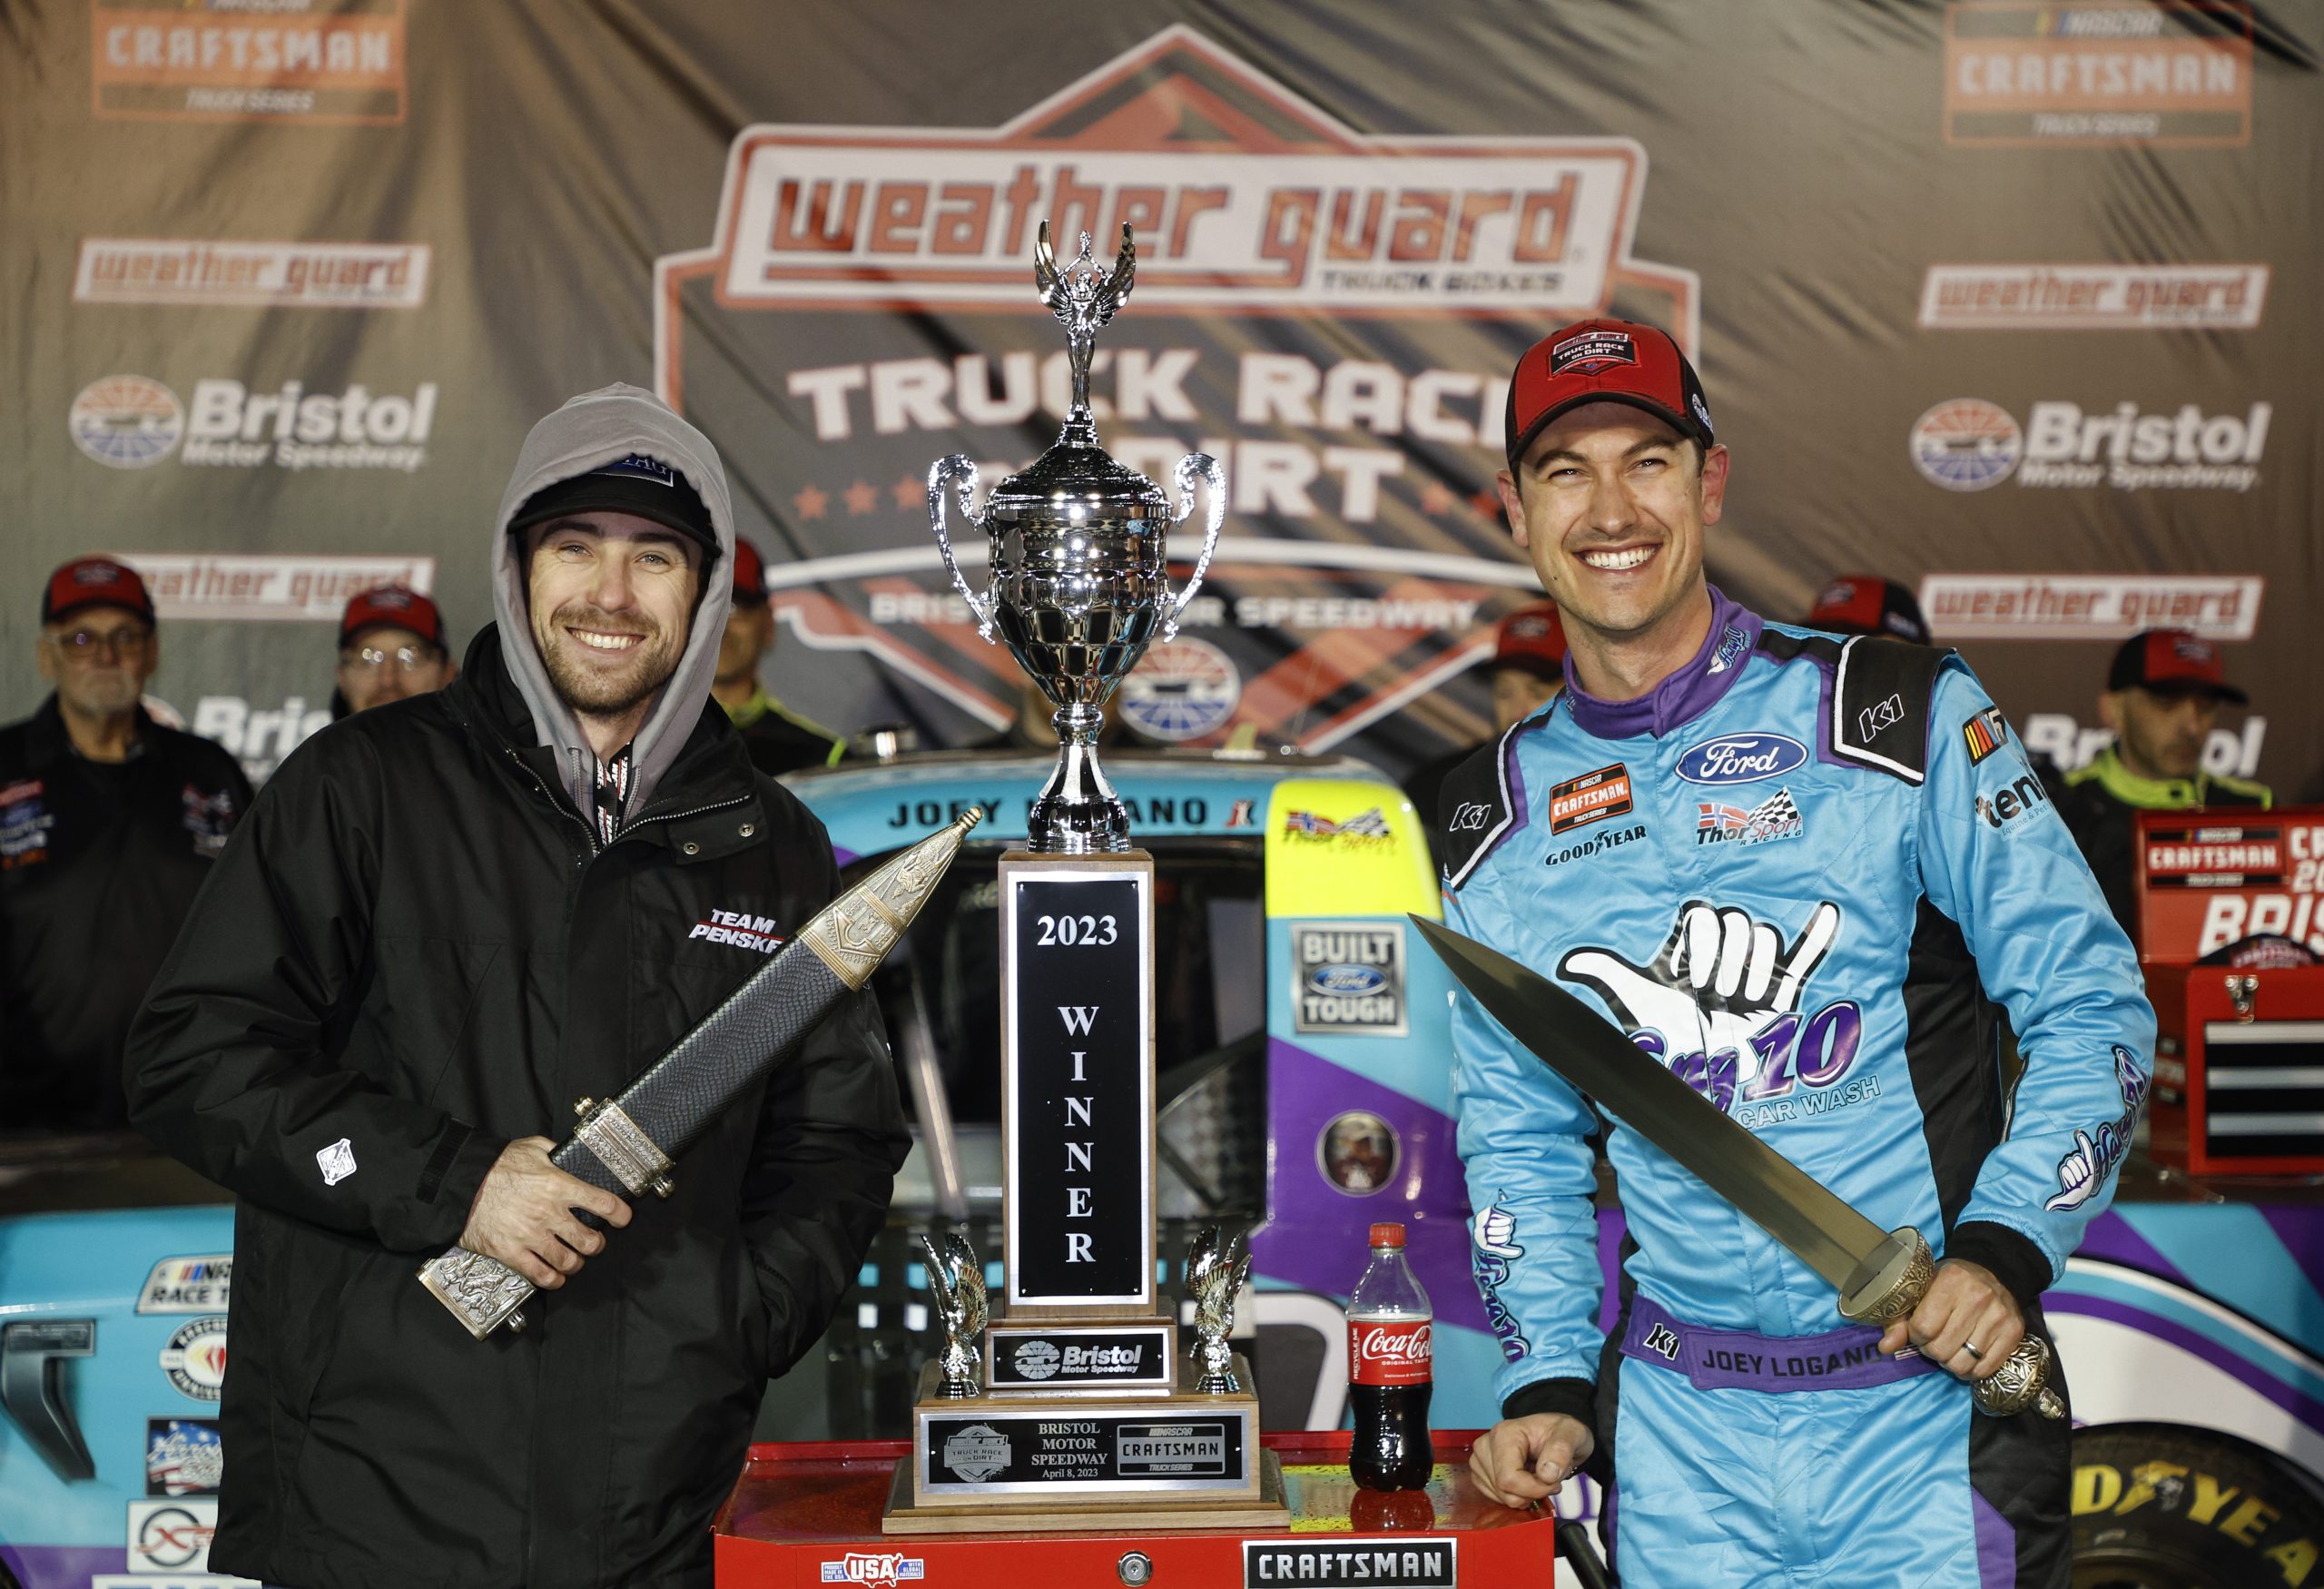 Credit: BRISTOL, TENNESSEE - APRIL 08: Joey Logano, driver of the #66 Hang 10 Car Wash Ford, and his spotter, NASCAR Cup Series driver Ryan Blaney, celebrate in victory lane after winning the NASCAR Craftsman Truck Series Weather Guard Truck Race on Dirt at Bristol Motor Speedway on April 08, 2023 in Bristol, Tennessee. (Photo by Jared C. Tilton/Getty Images)